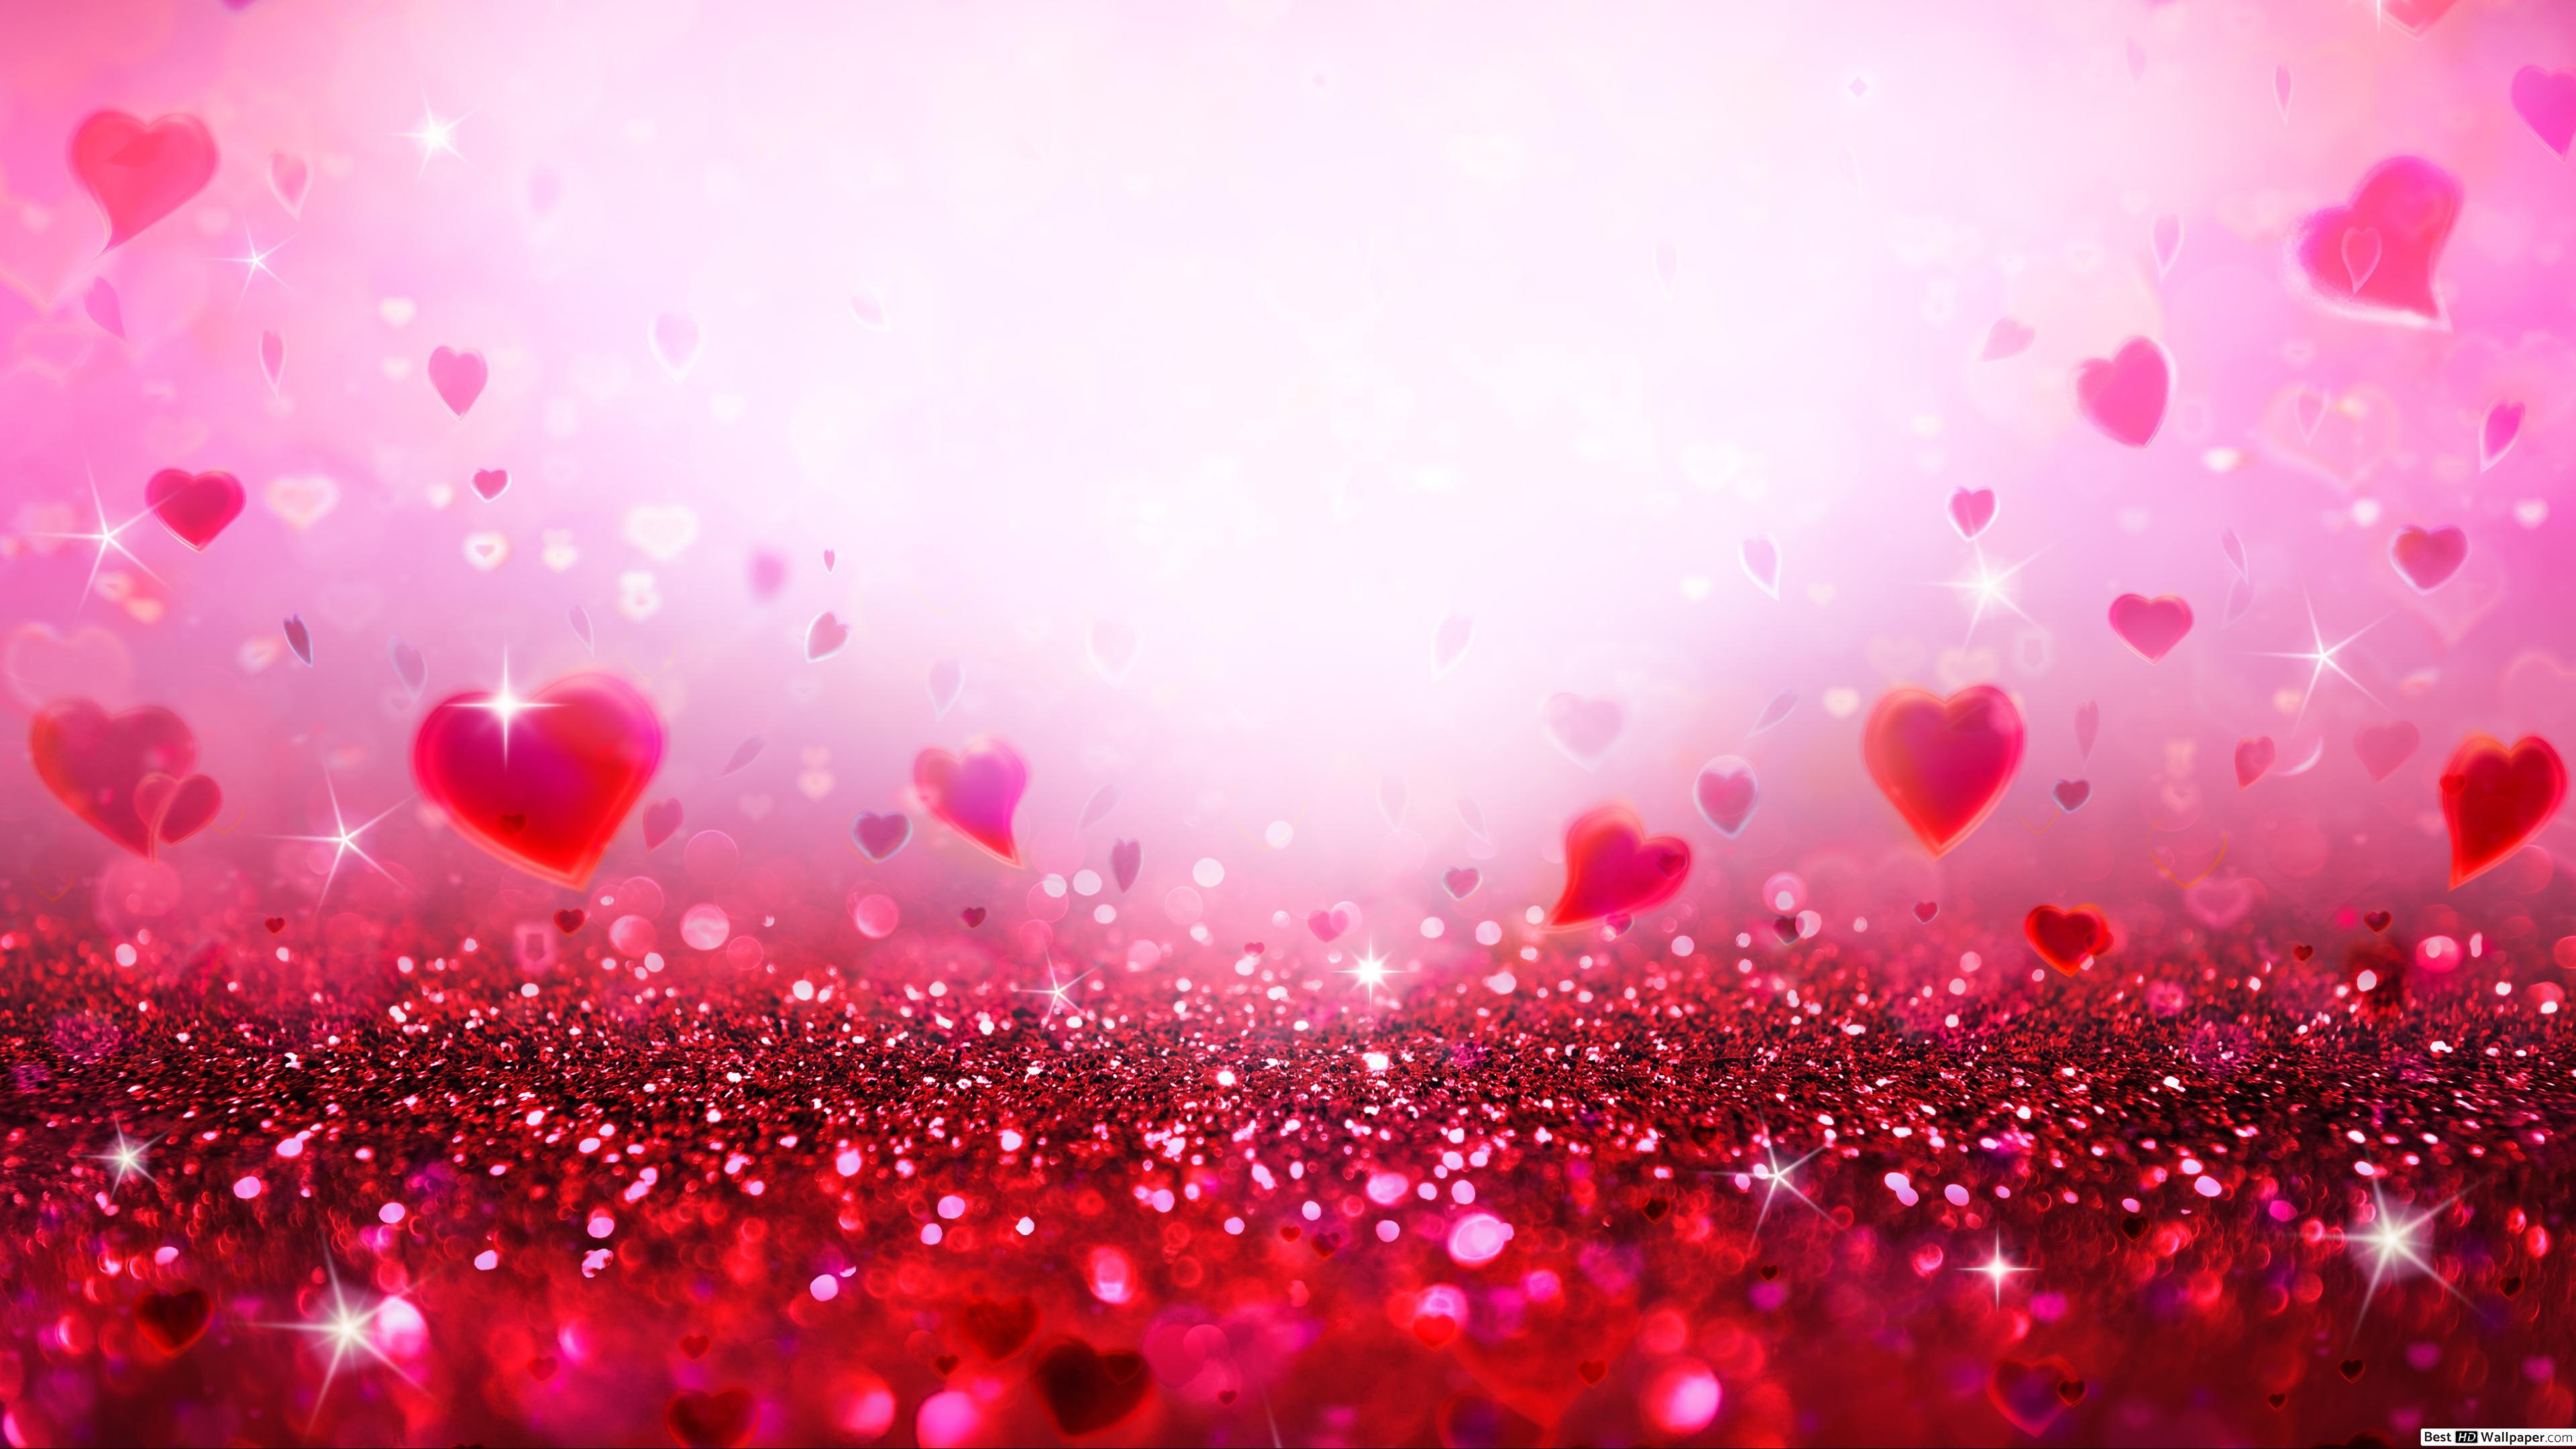 Valentine's day sparkly hearts HD wallpaper download